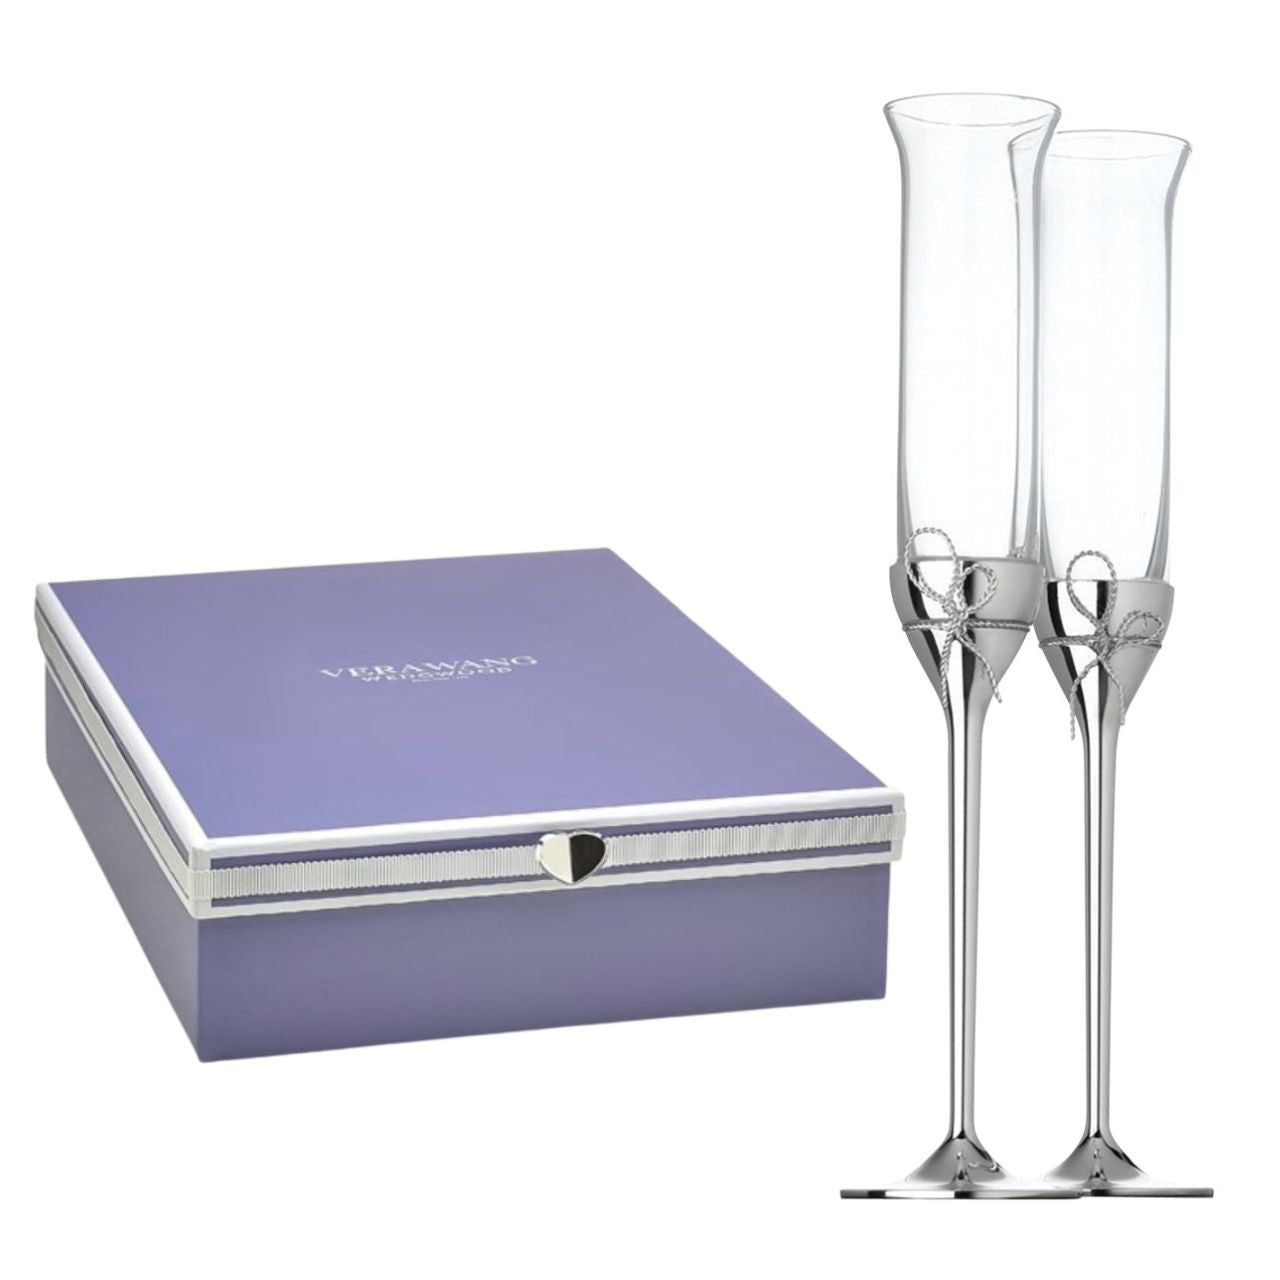 Wedgwood Vera Wang Love Knots Toasting Flutes Pair  Beautiful sterling silver Love Knots characterize the elegant Vera Wang Love Knots collection. A slender profile of fine crystal is offset by a silver-plated base accented with a delicate bow. Raise a toast with these elegant Love Knots Toasting Flutes.